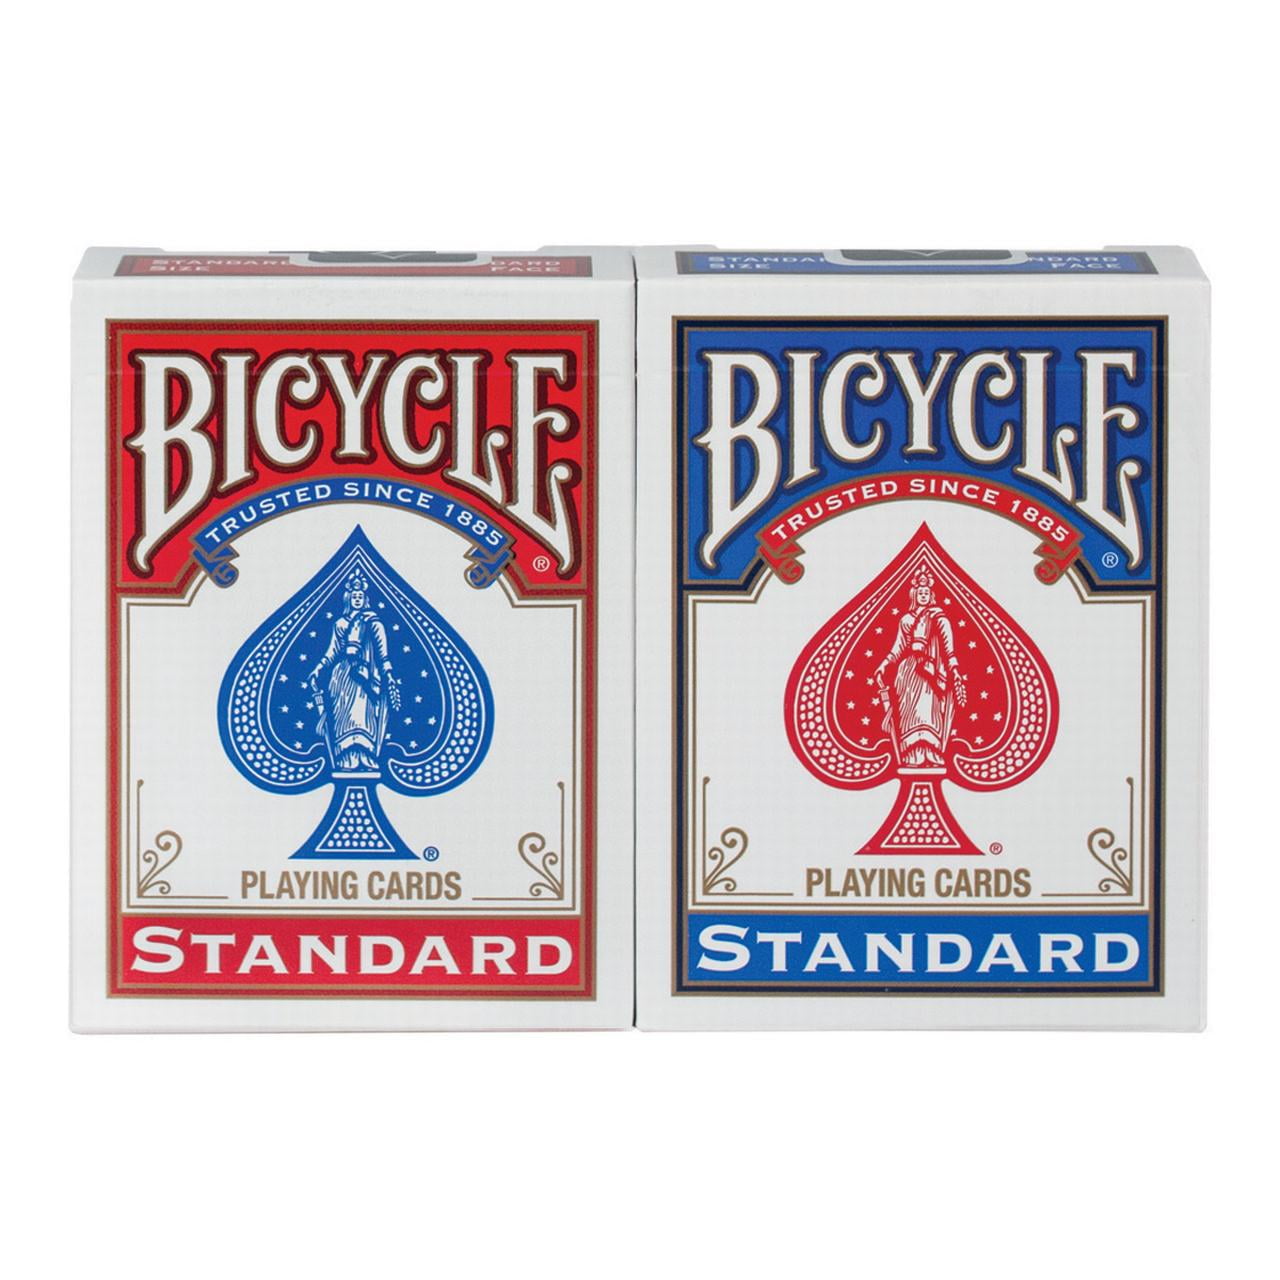 Red 1 1 Blue and 2 decks of Bicycle Poker Size Jumbo Index Playing Cards 